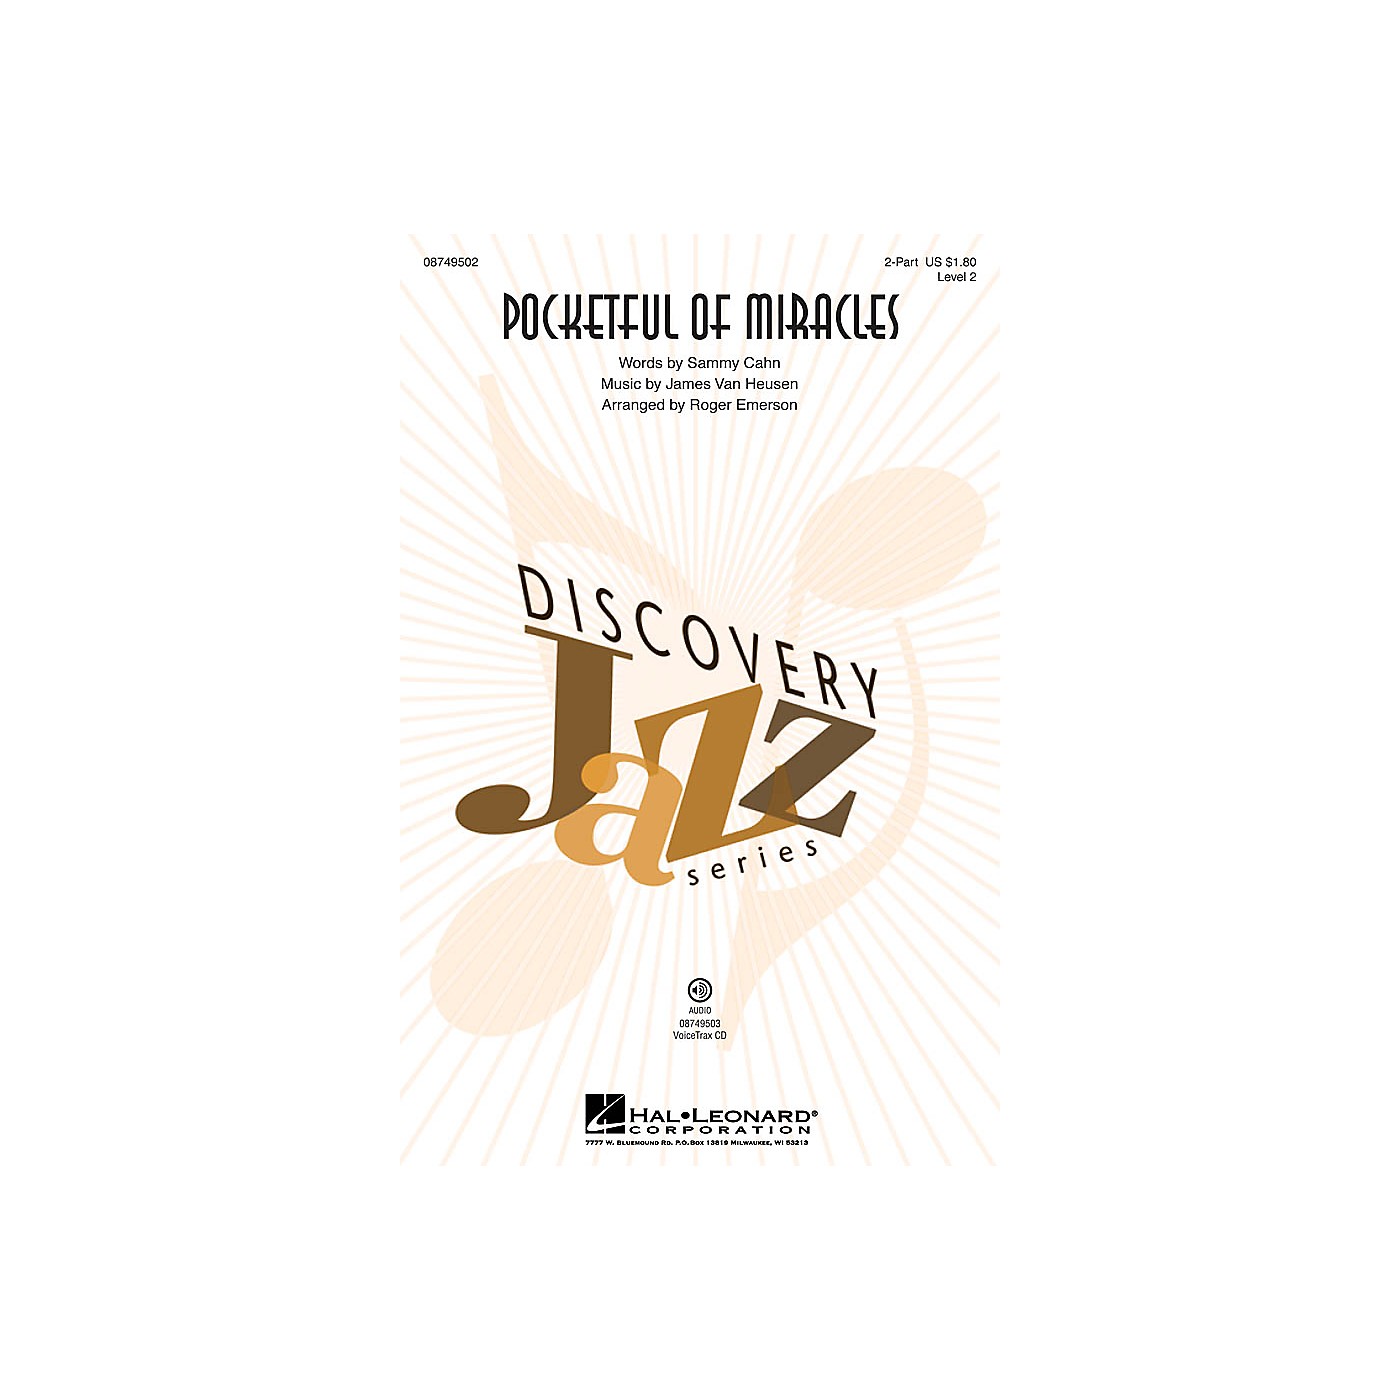 Hal Leonard Pocketful of Miracles (Discovery Level 2) VoiceTrax CD by Frank Sinatra Arranged by Roger Emerson thumbnail